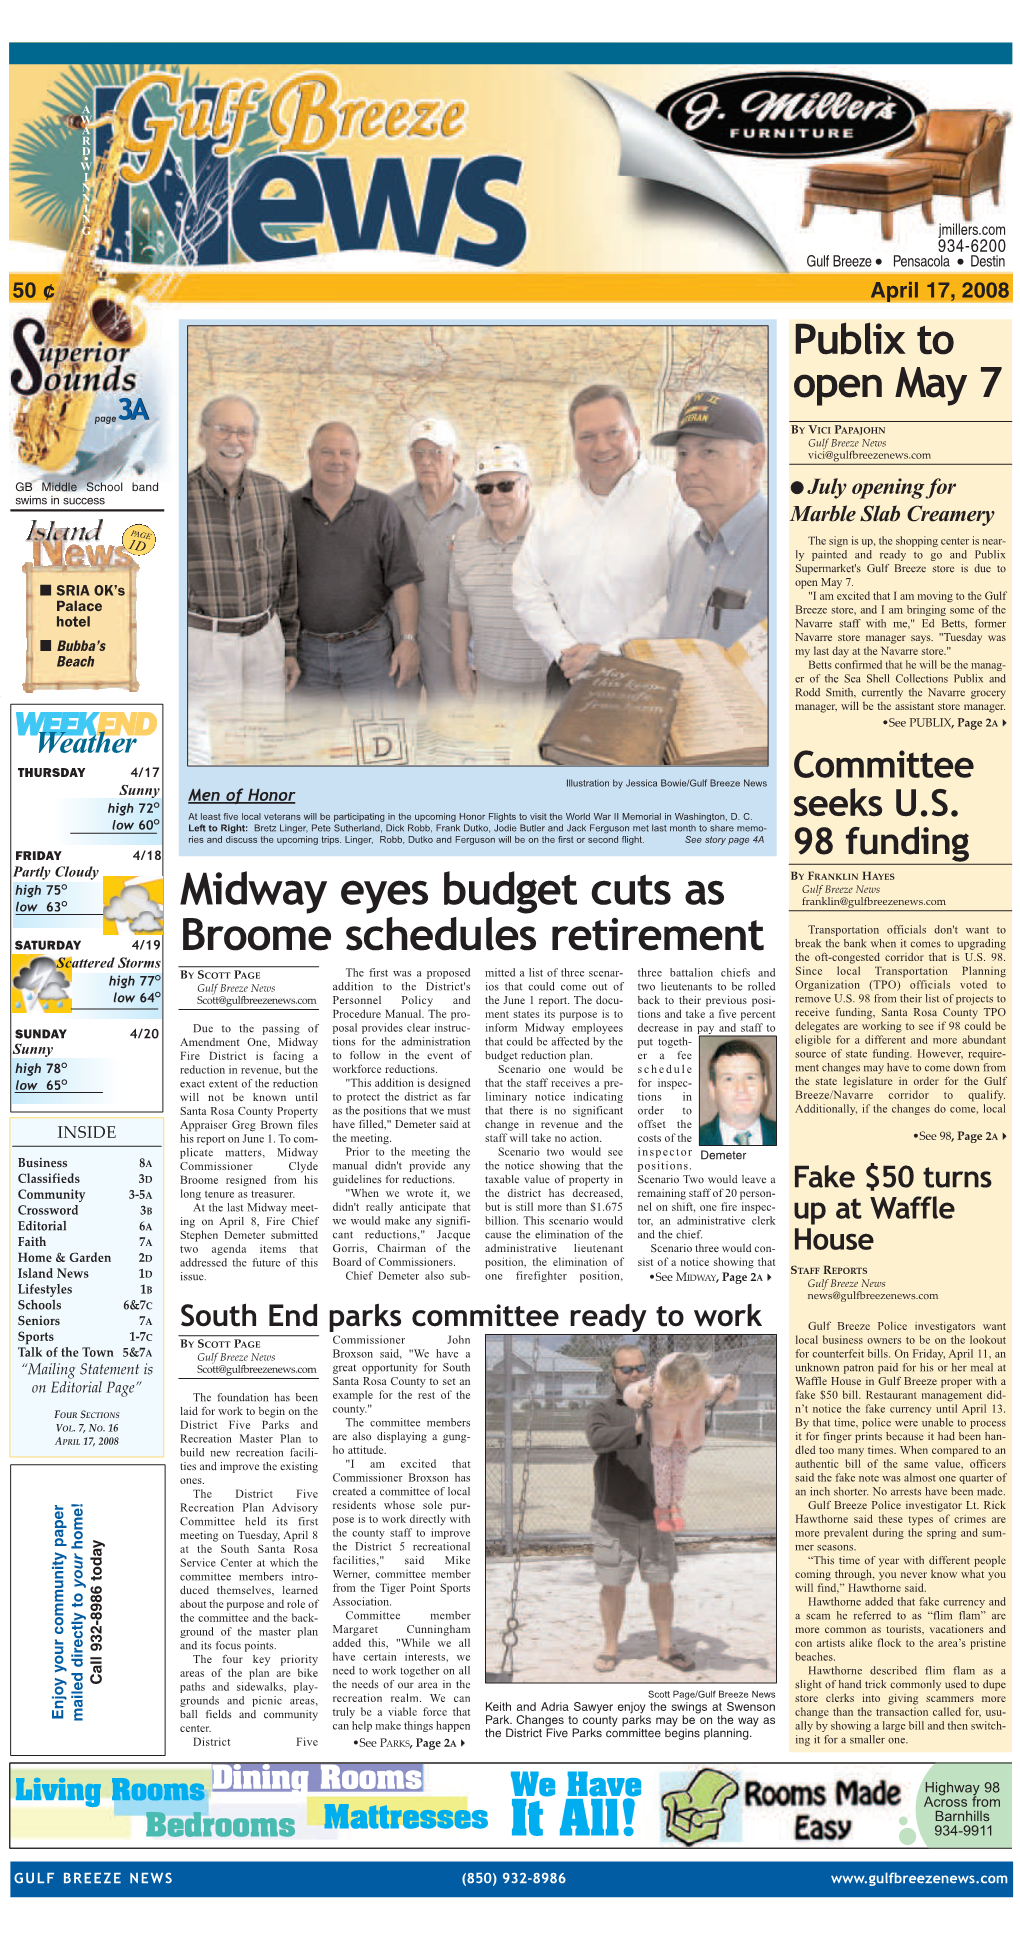 Midway Eyes Budget Cuts As Broome Schedules Retirement